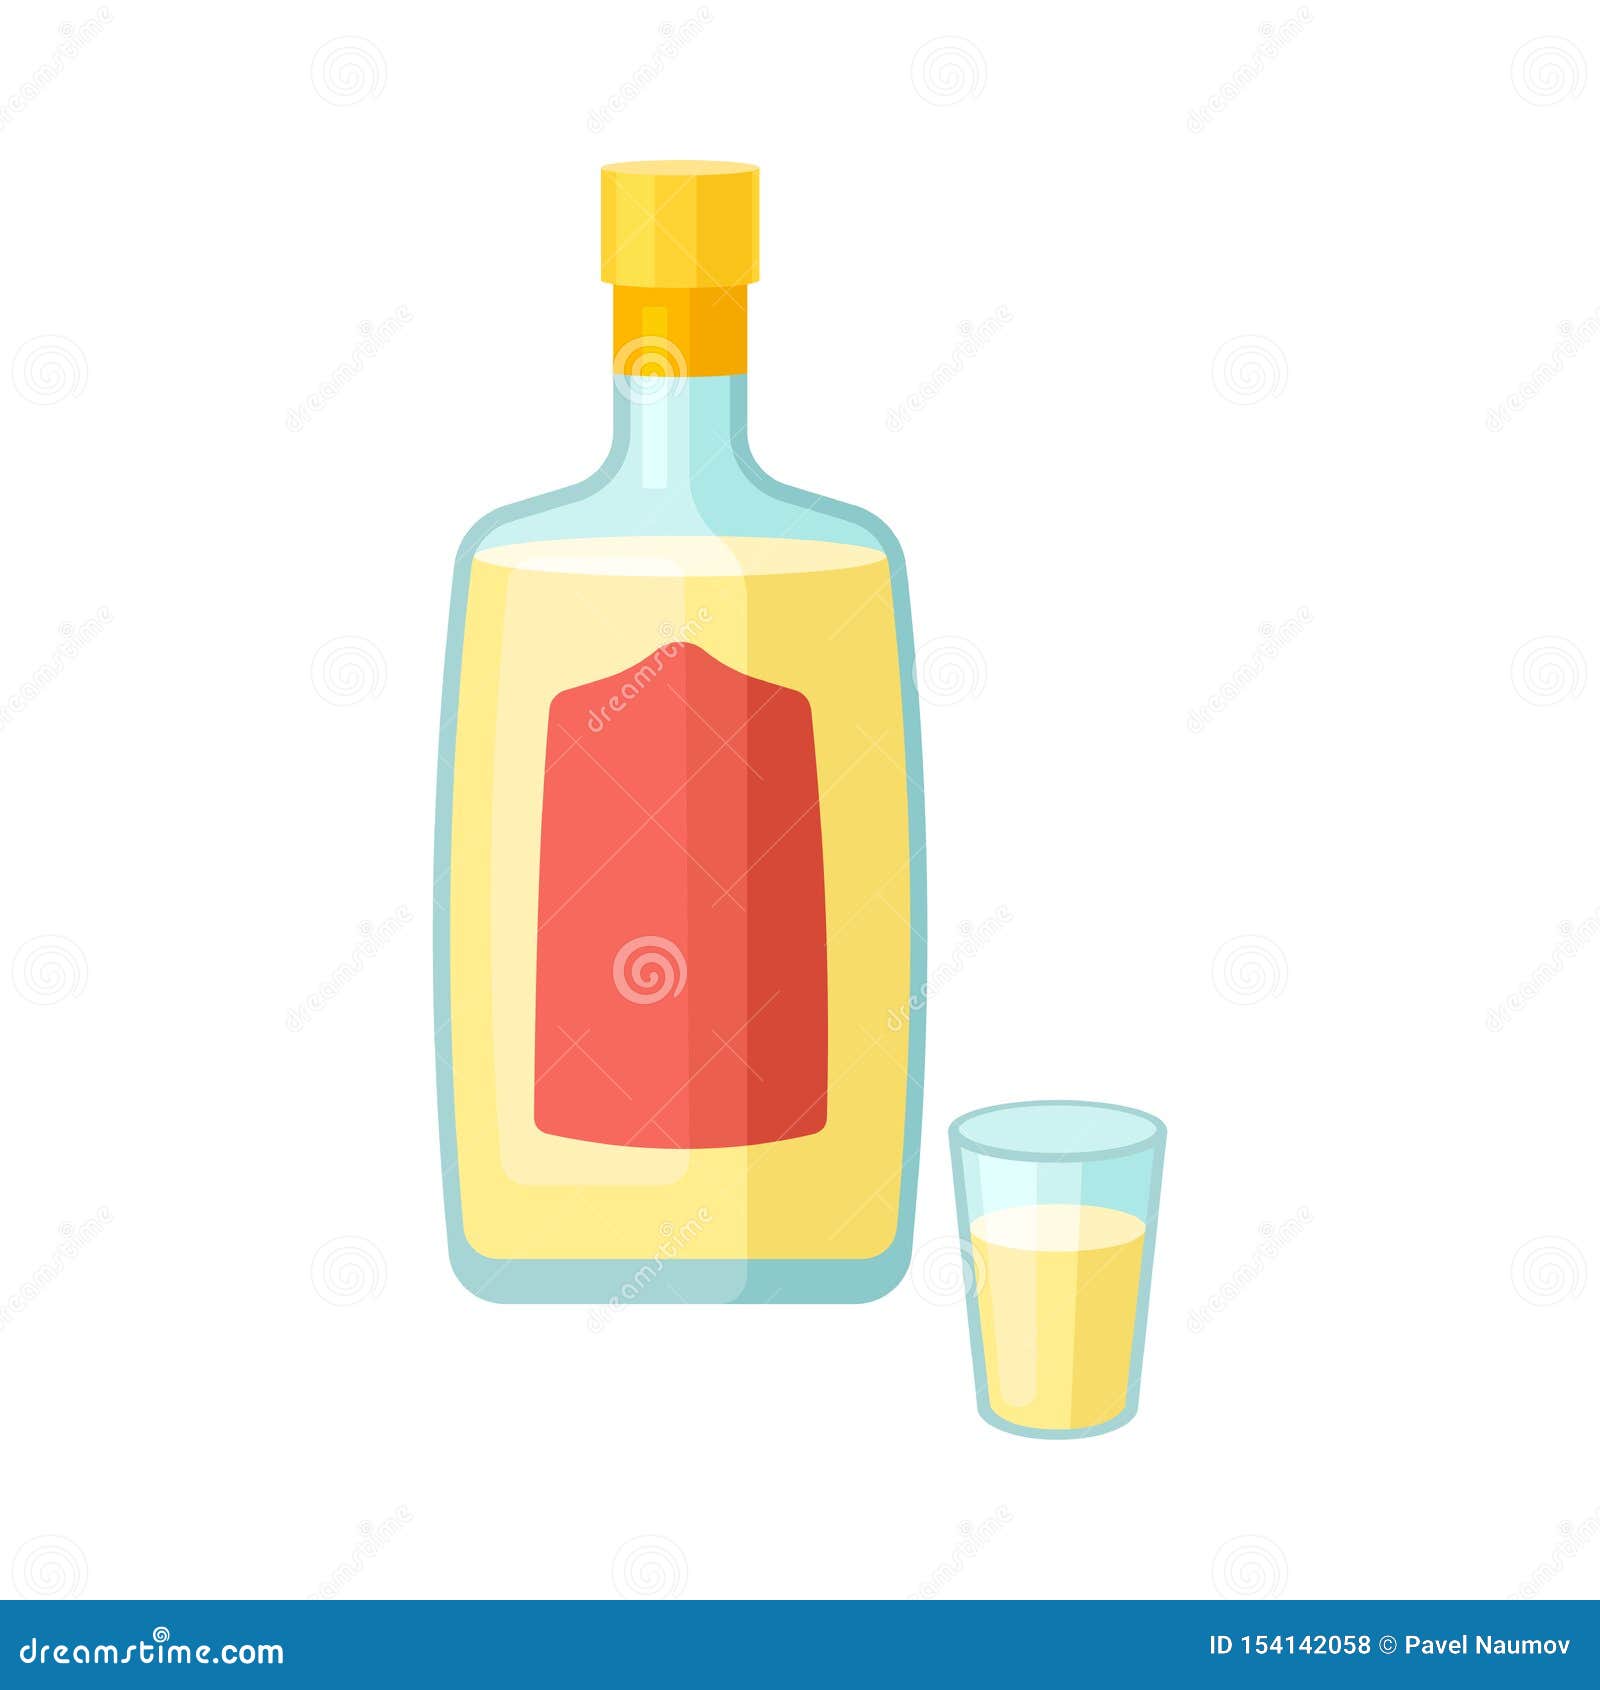 Download Glass Liquid Yellow Stock Illustrations 19 117 Glass Liquid Yellow Stock Illustrations Vectors Clipart Dreamstime Yellowimages Mockups